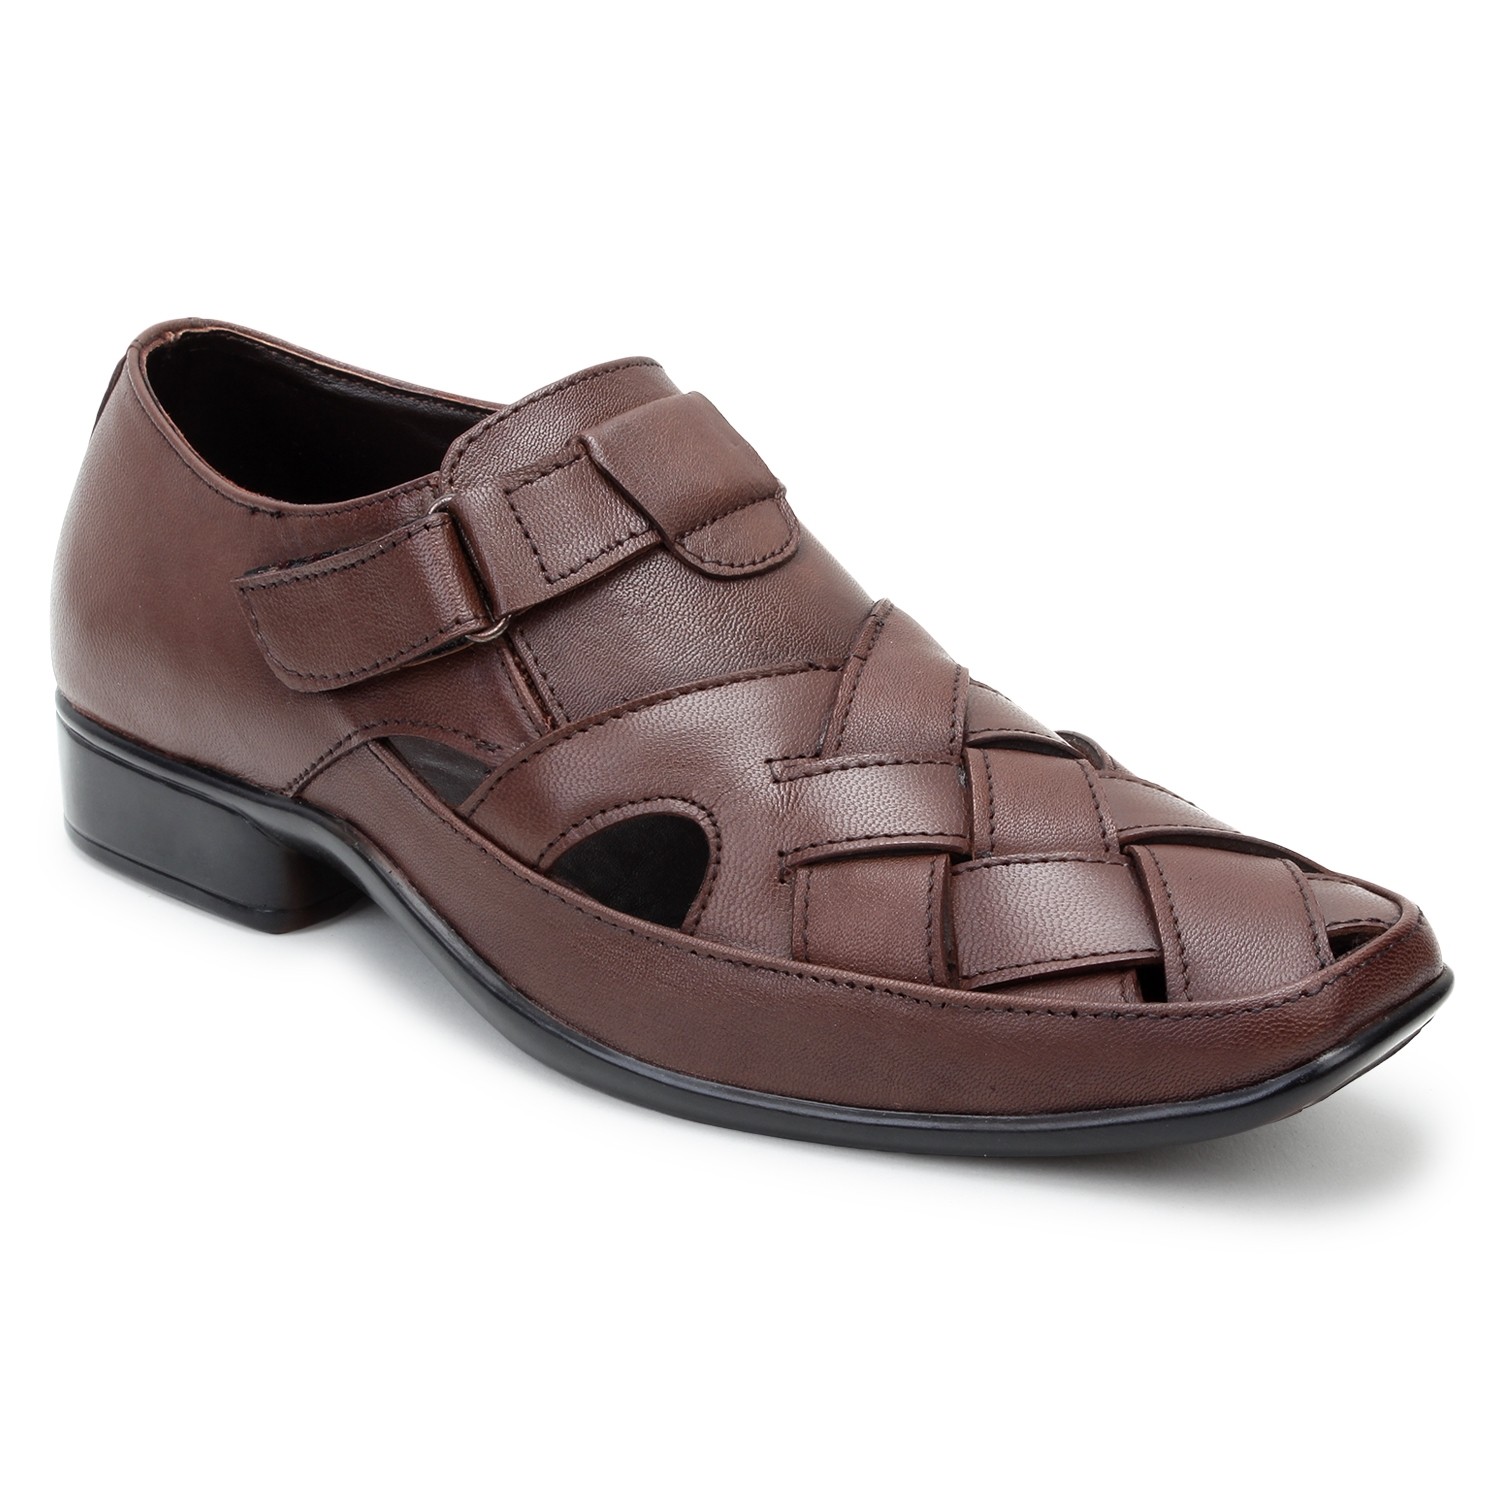 Party Wear | Leather Formal | Mens formal | Casual | Men | Shoes | India